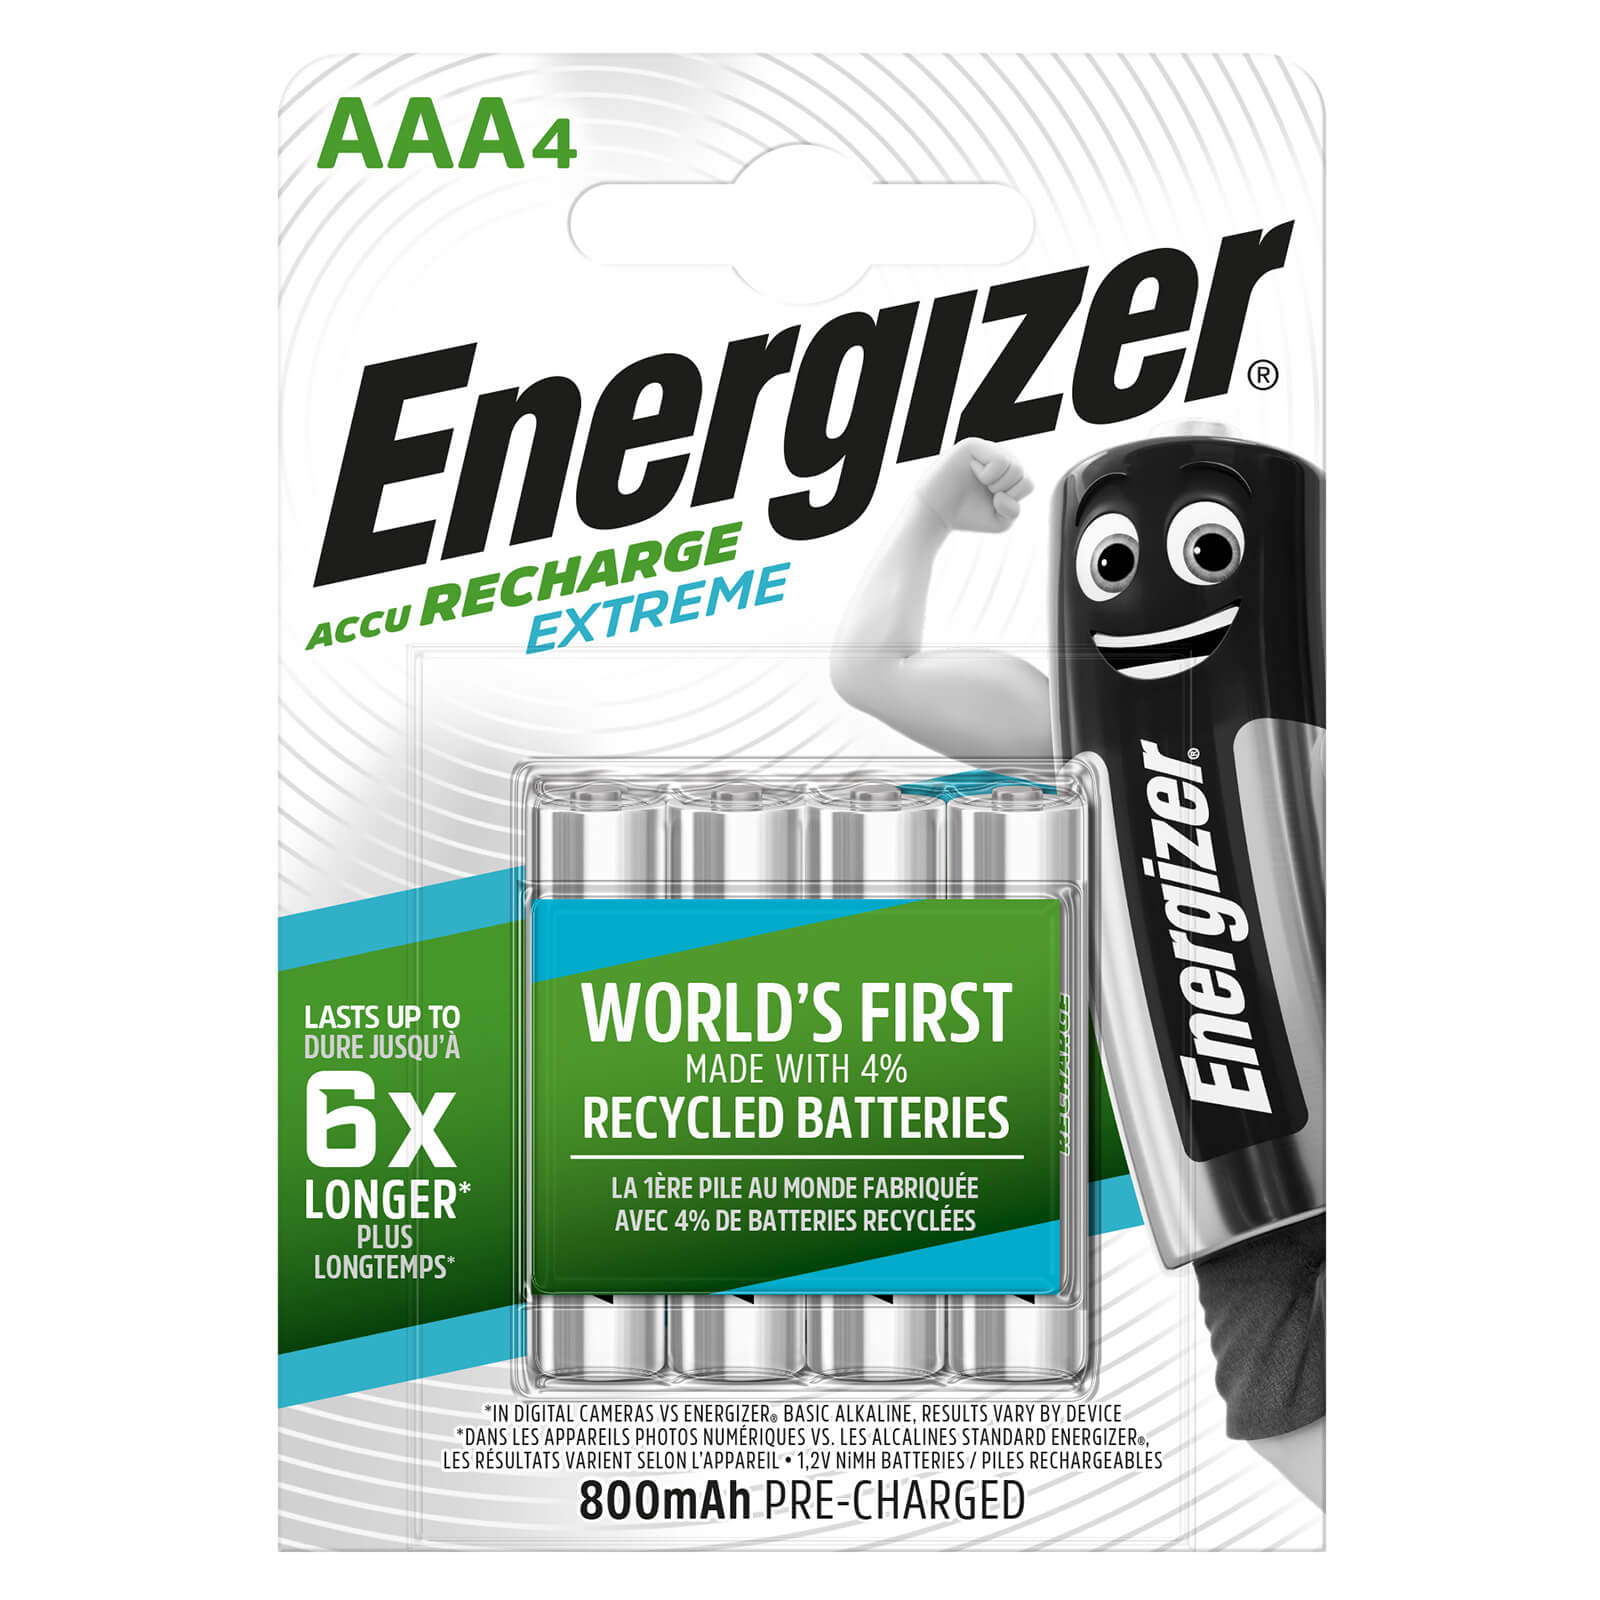 Energizer Extreme 800mAh Rechargeable AAA Batteries - 4 Pack